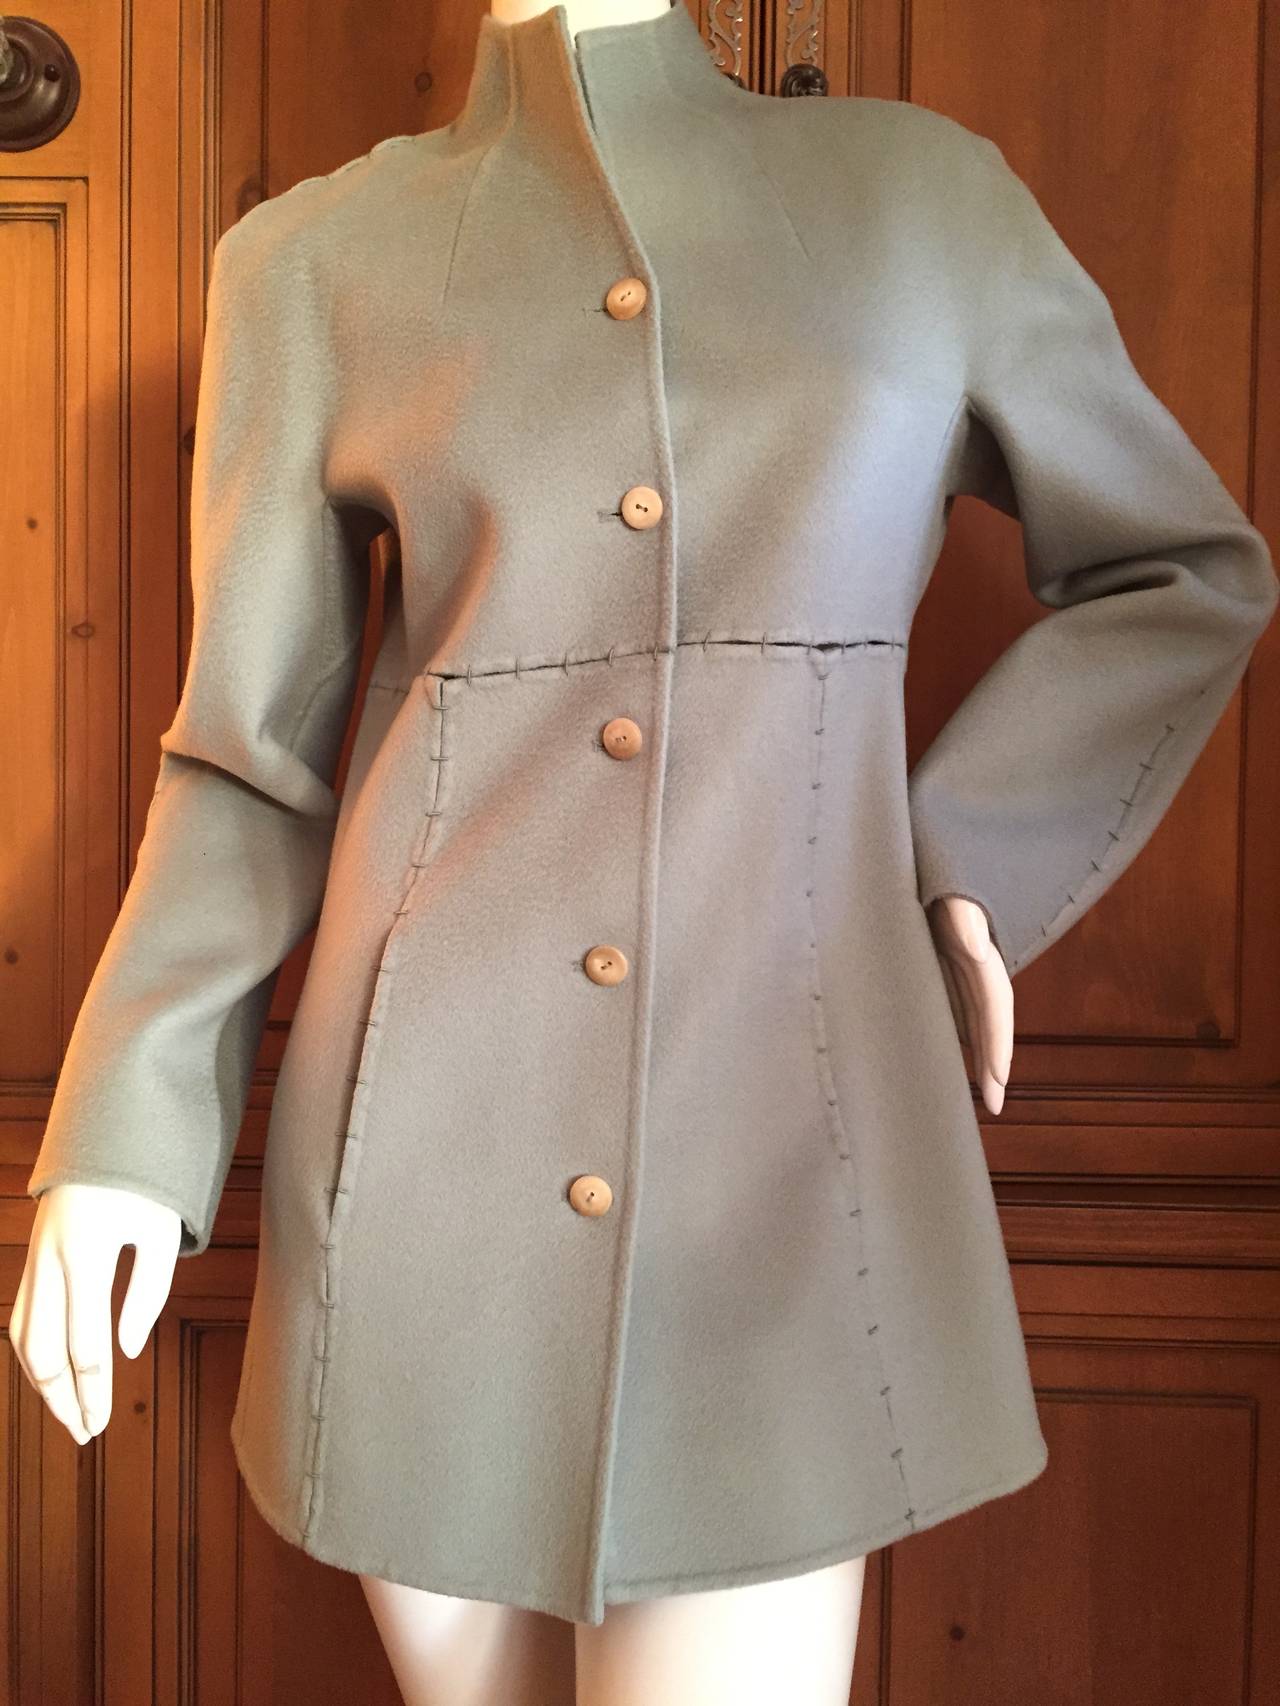 Exquisite doubleface cashmere jacket in pale green from Ralph Ruci.
Ralph's signature over stich details are so beautiful.
Size 8
Bust 42
Waist 32
Length 31